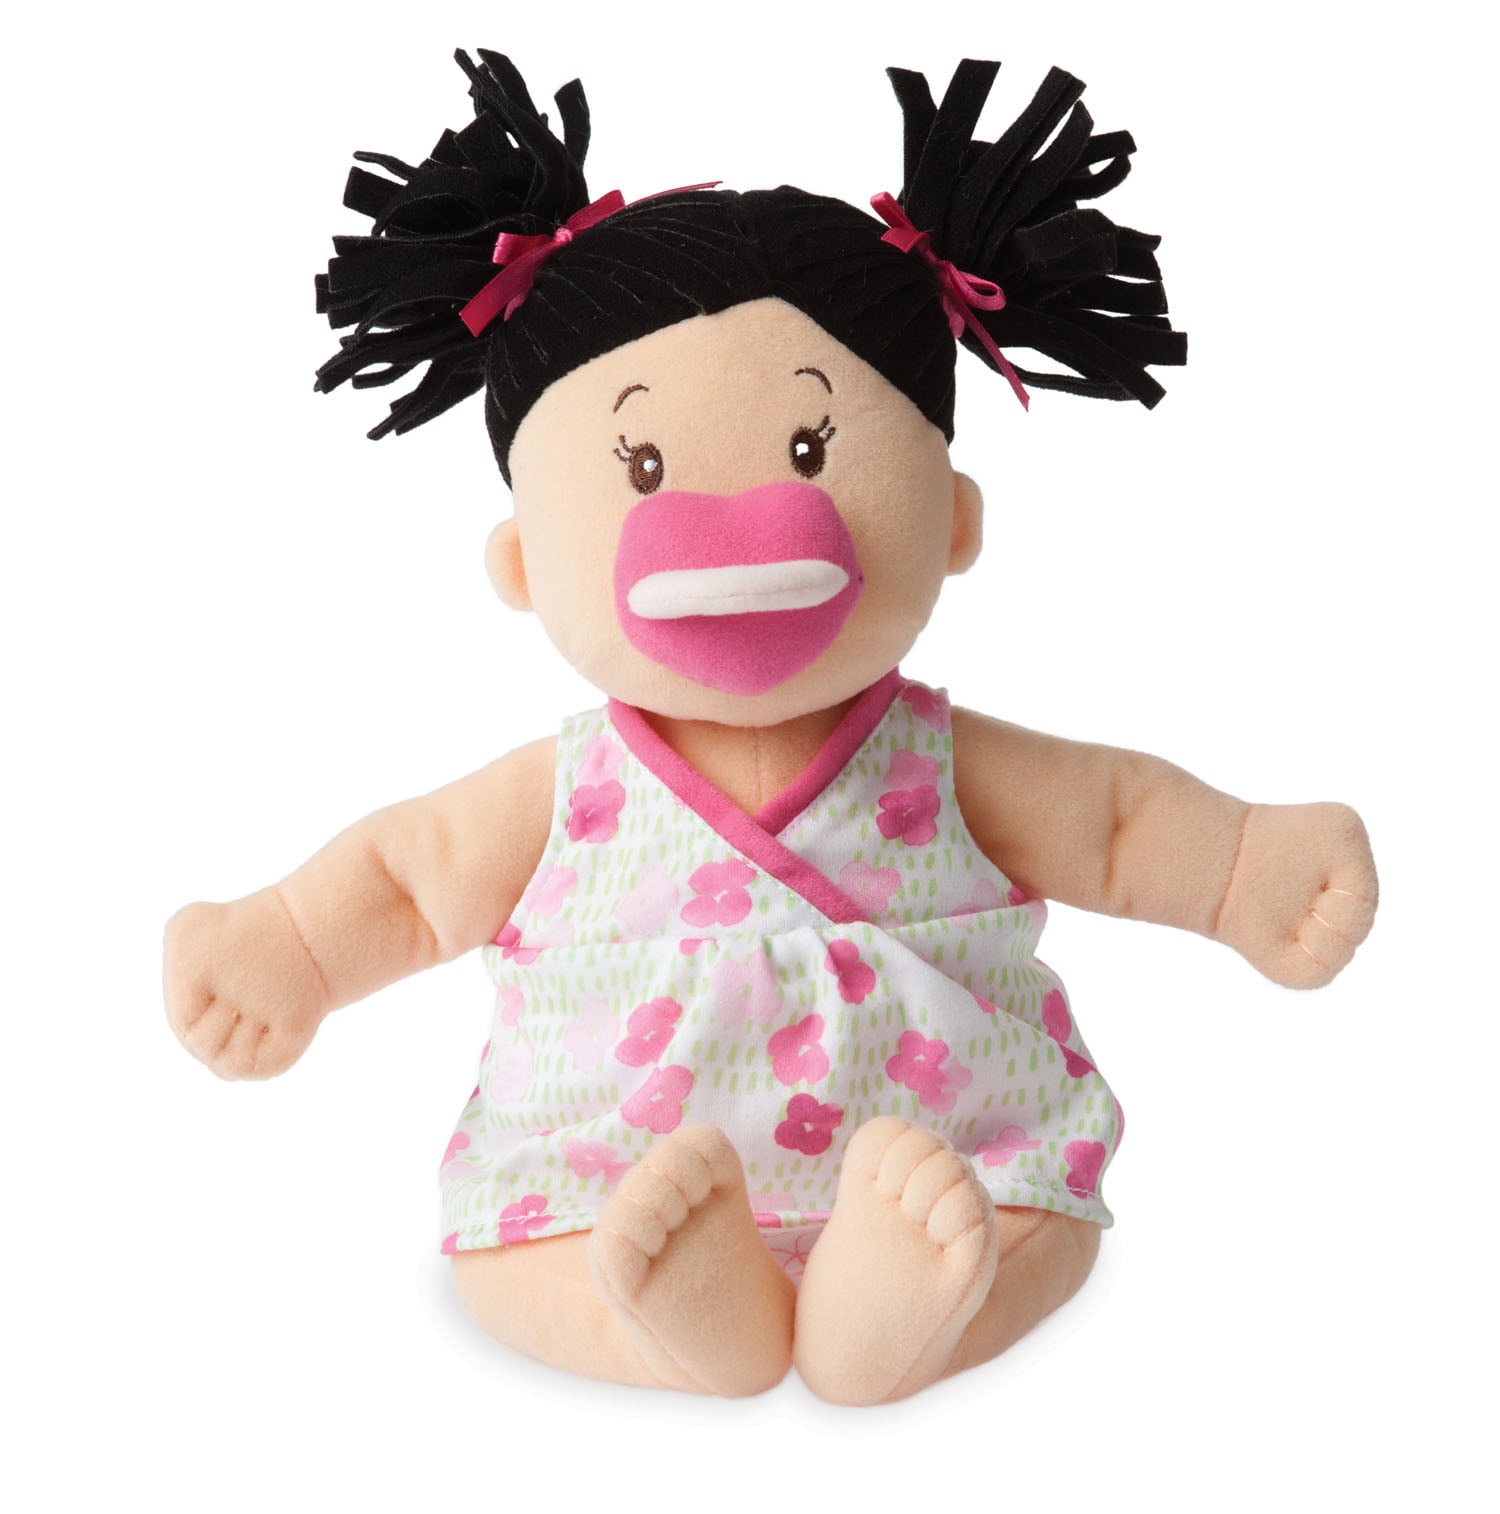 Manhattan Toy Baby Stella Blonde Soft Baby Doll for Ages 1 Year and Up, 15" - Walmart.com